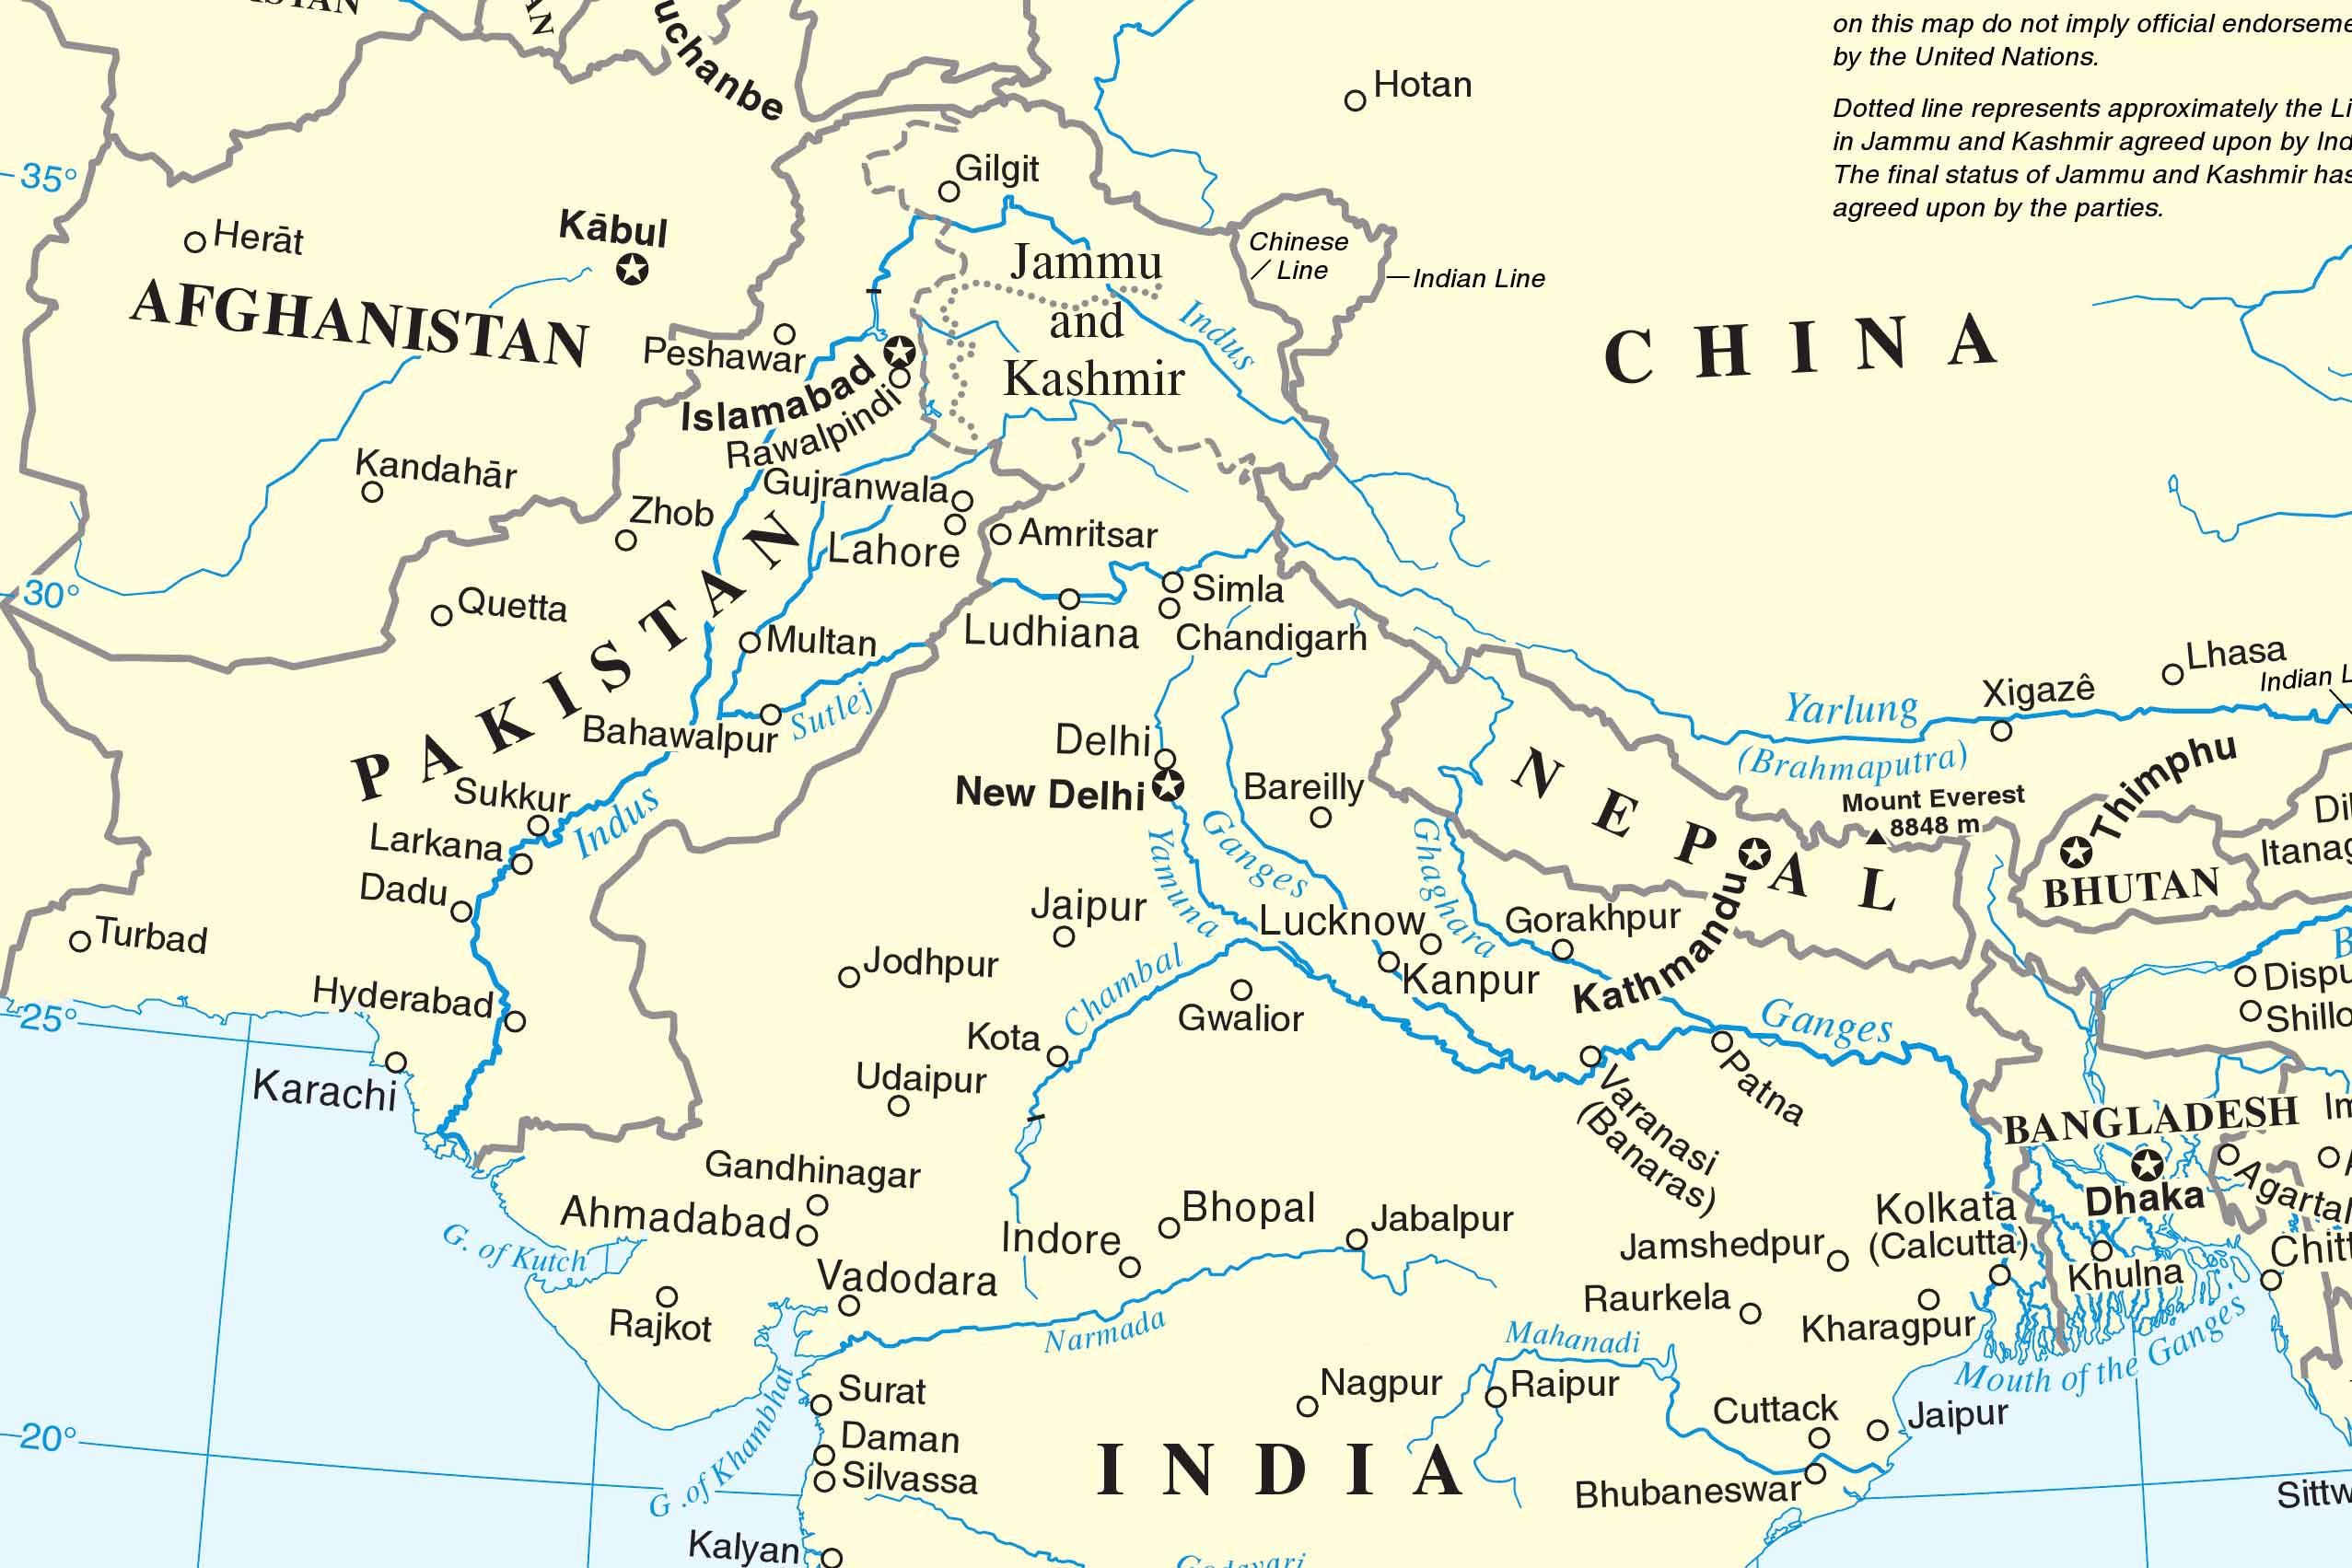 a map of South Asia